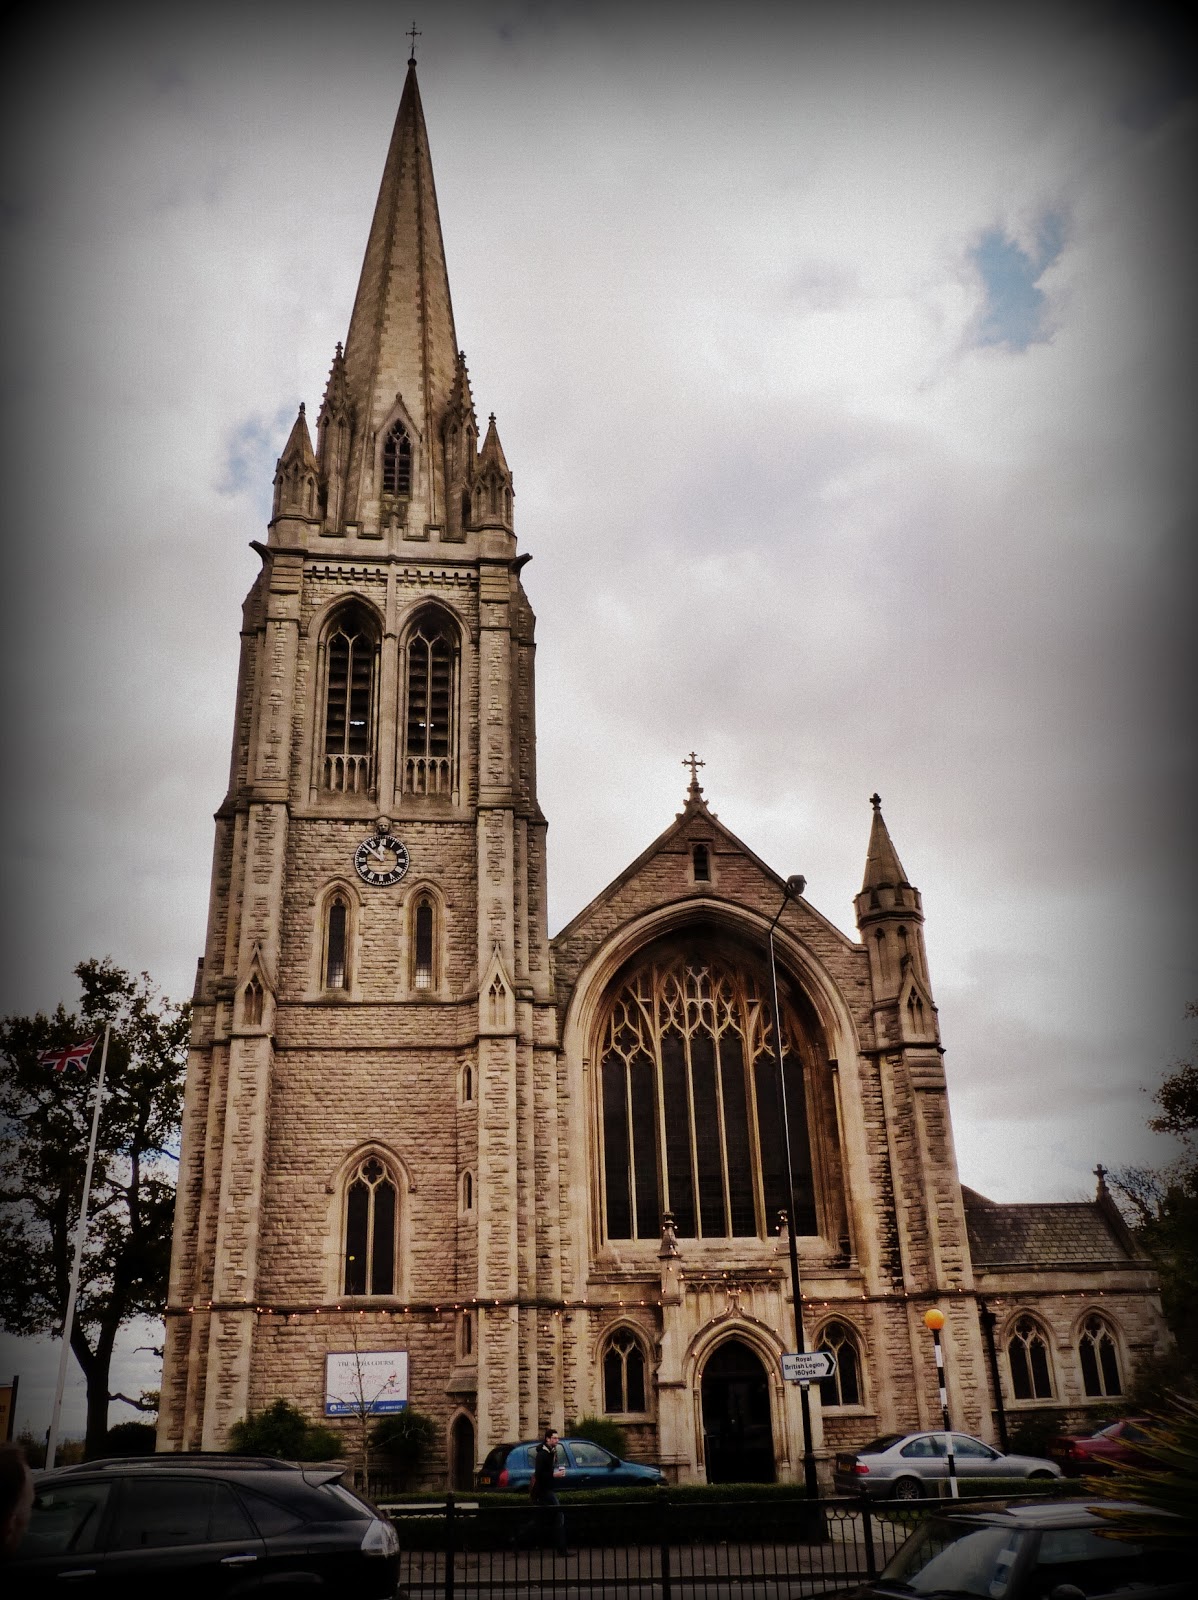 Beside the See Side: Music & Melodies in Muswell Hill: St James Church
